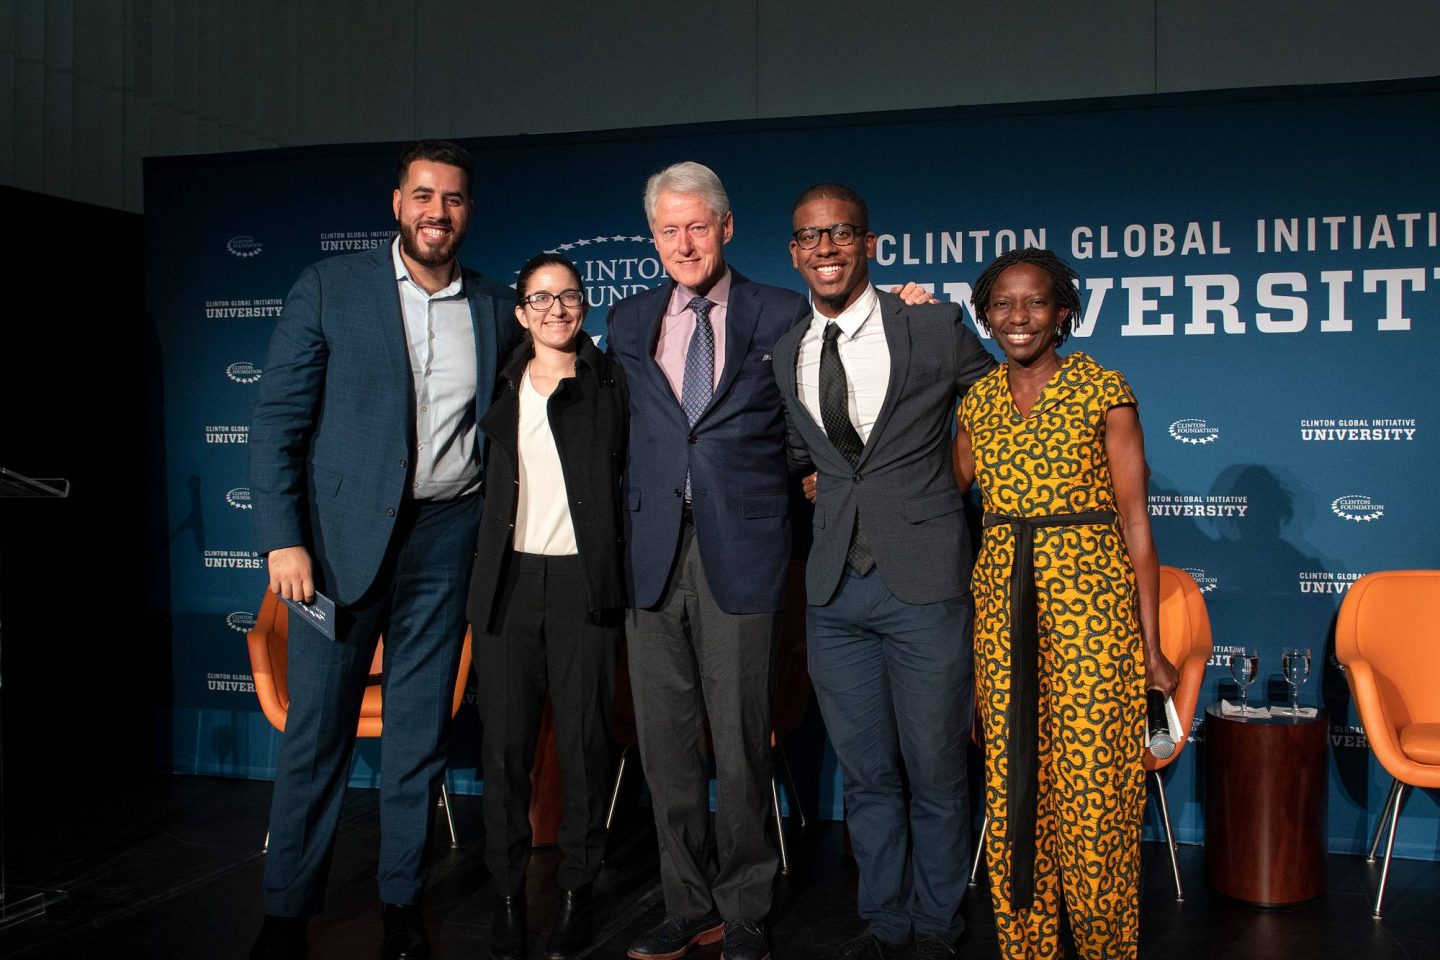 A group of students onstage with President Clinton during a CGI U event